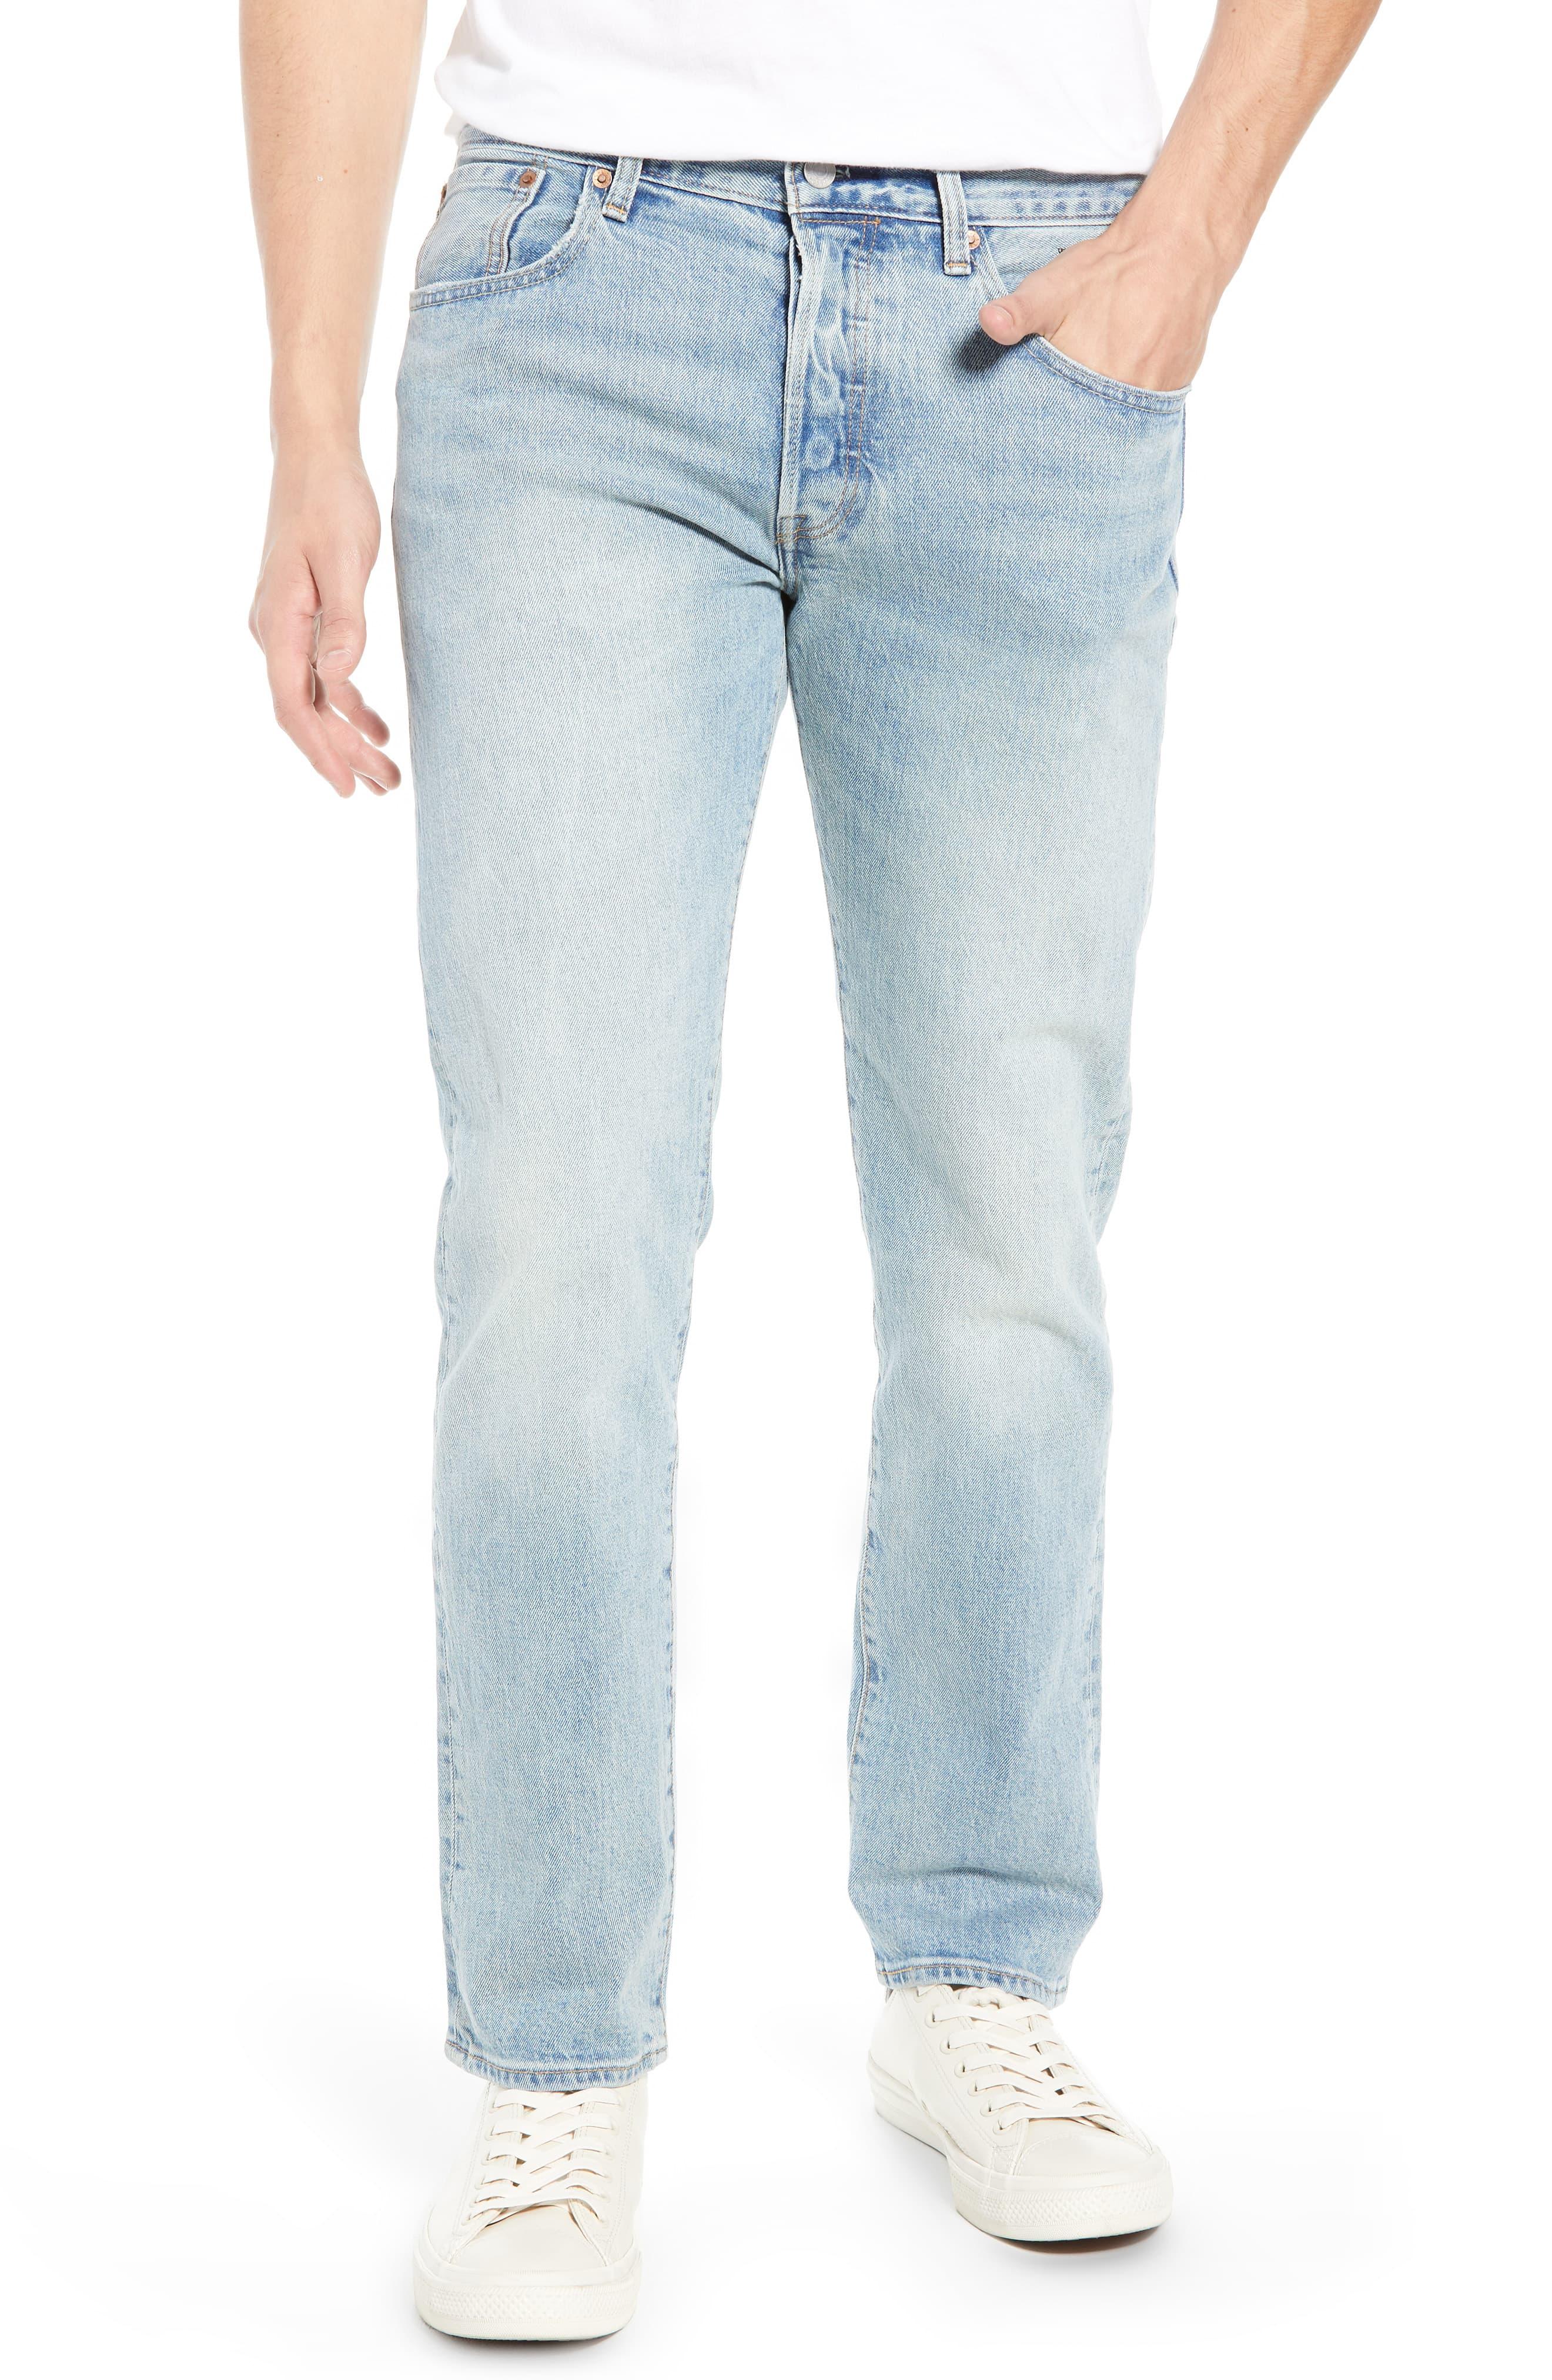 Levi's X Justin Timberlake 501 Straight Leg Jeans in Blue for Men - Lyst